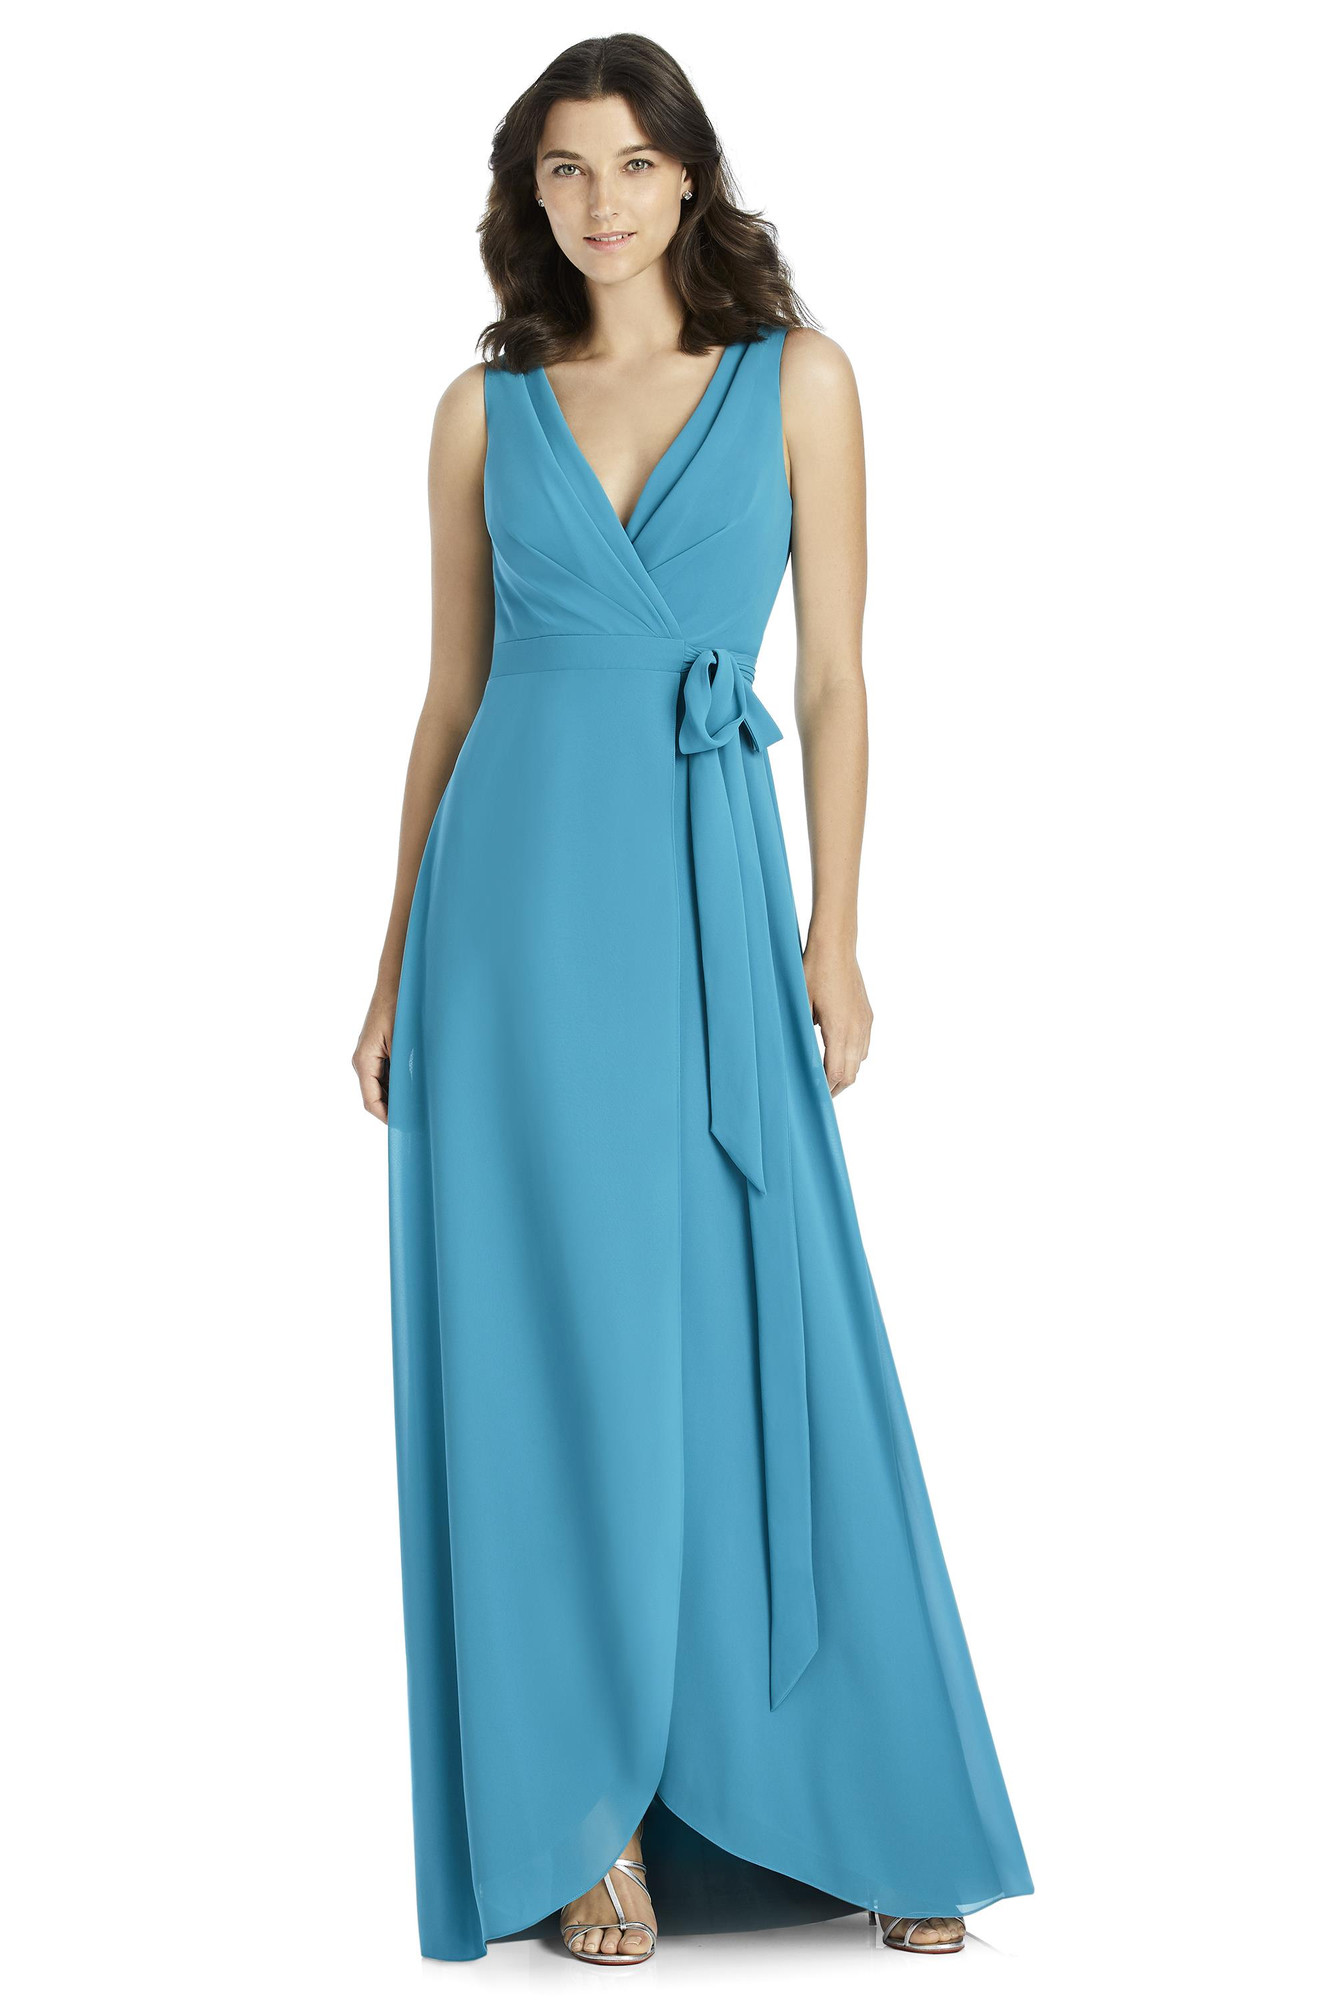 JP1025 Bridesmaid Dress from Dessy Collection hitched.co.uk